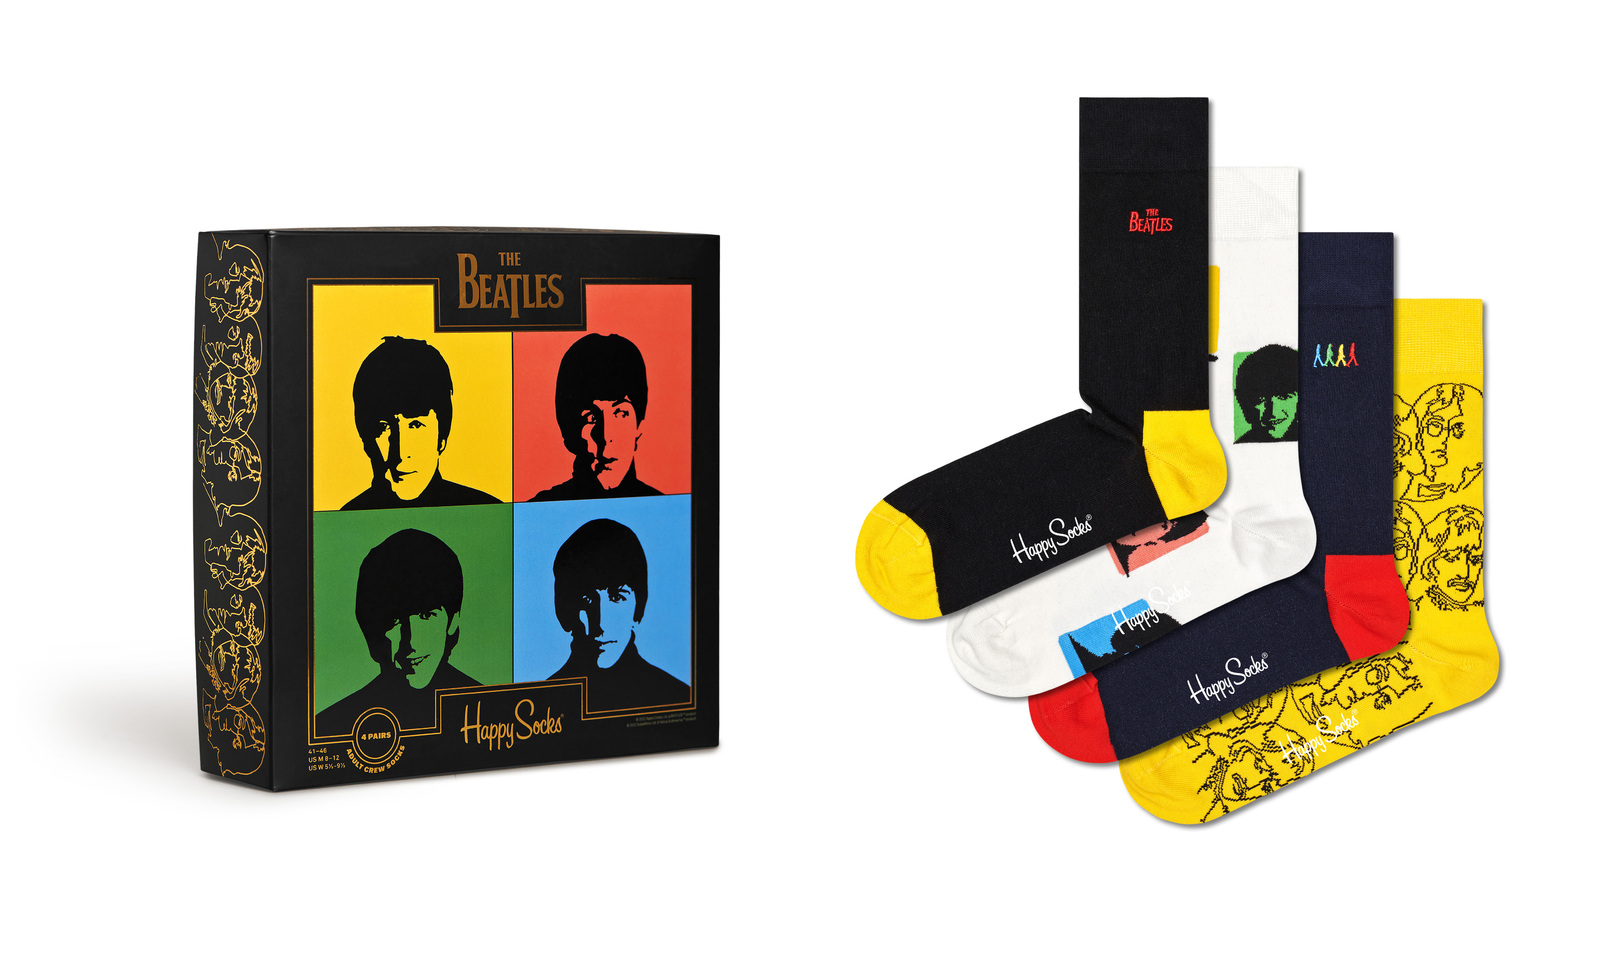 HS XBEA09-0200 The Beatles 4-Pack Gift Set